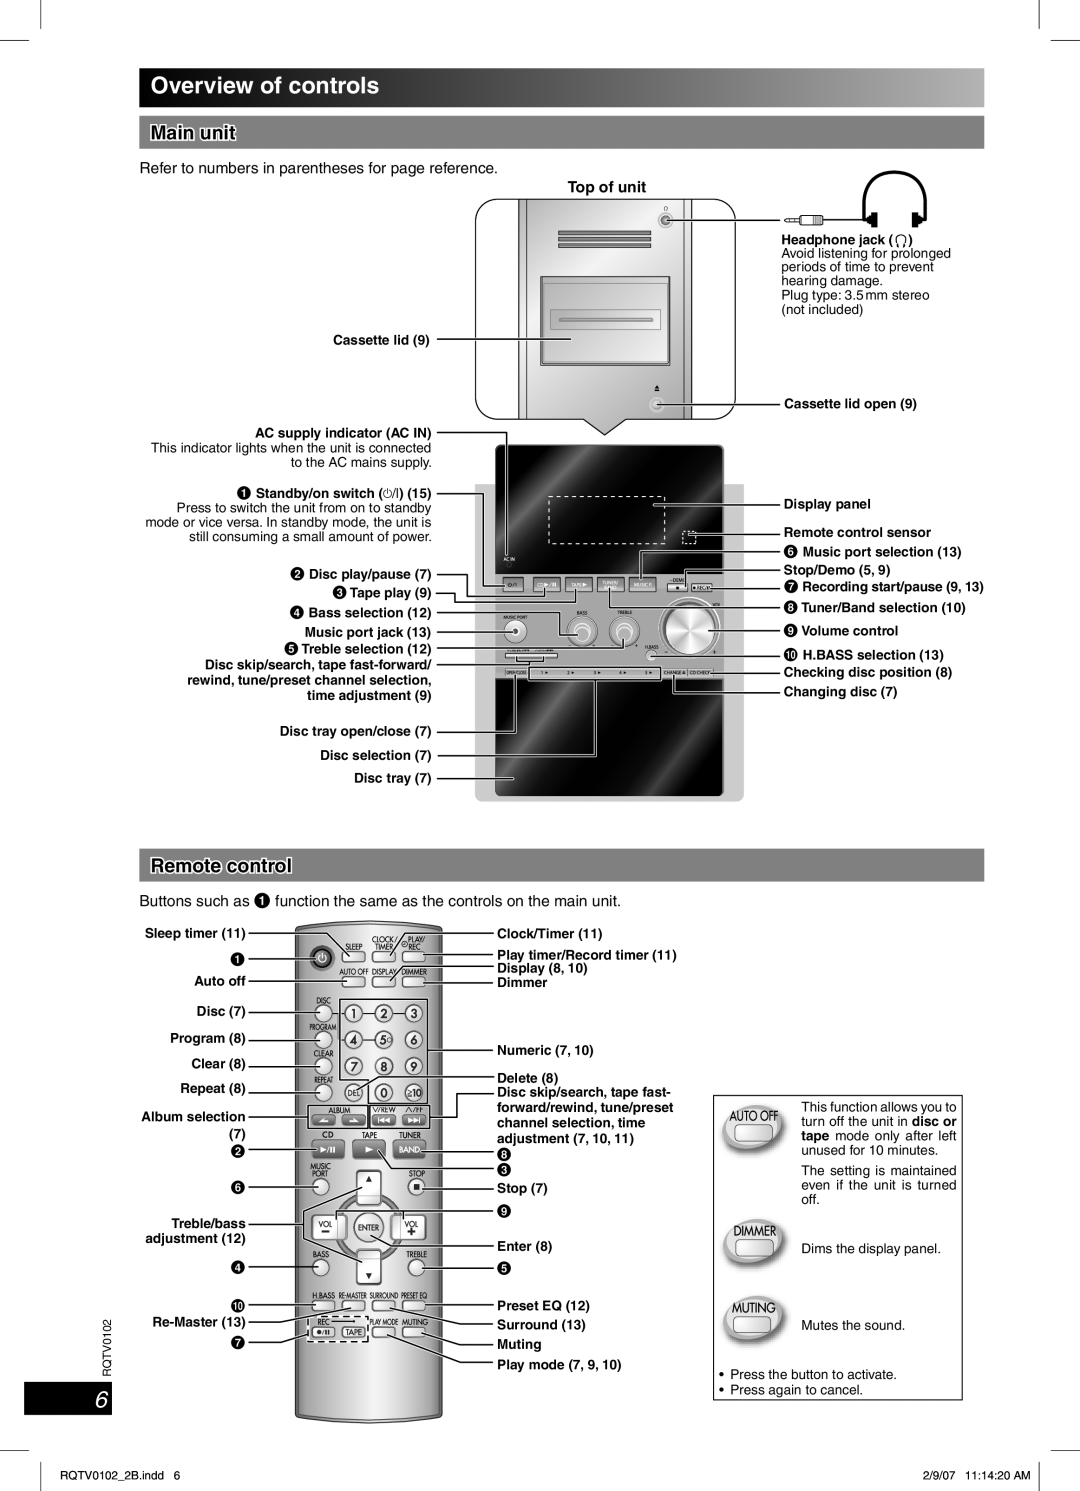 Panasonic SC-PM54 specifications Overview of controls, Main unit, Remote control 